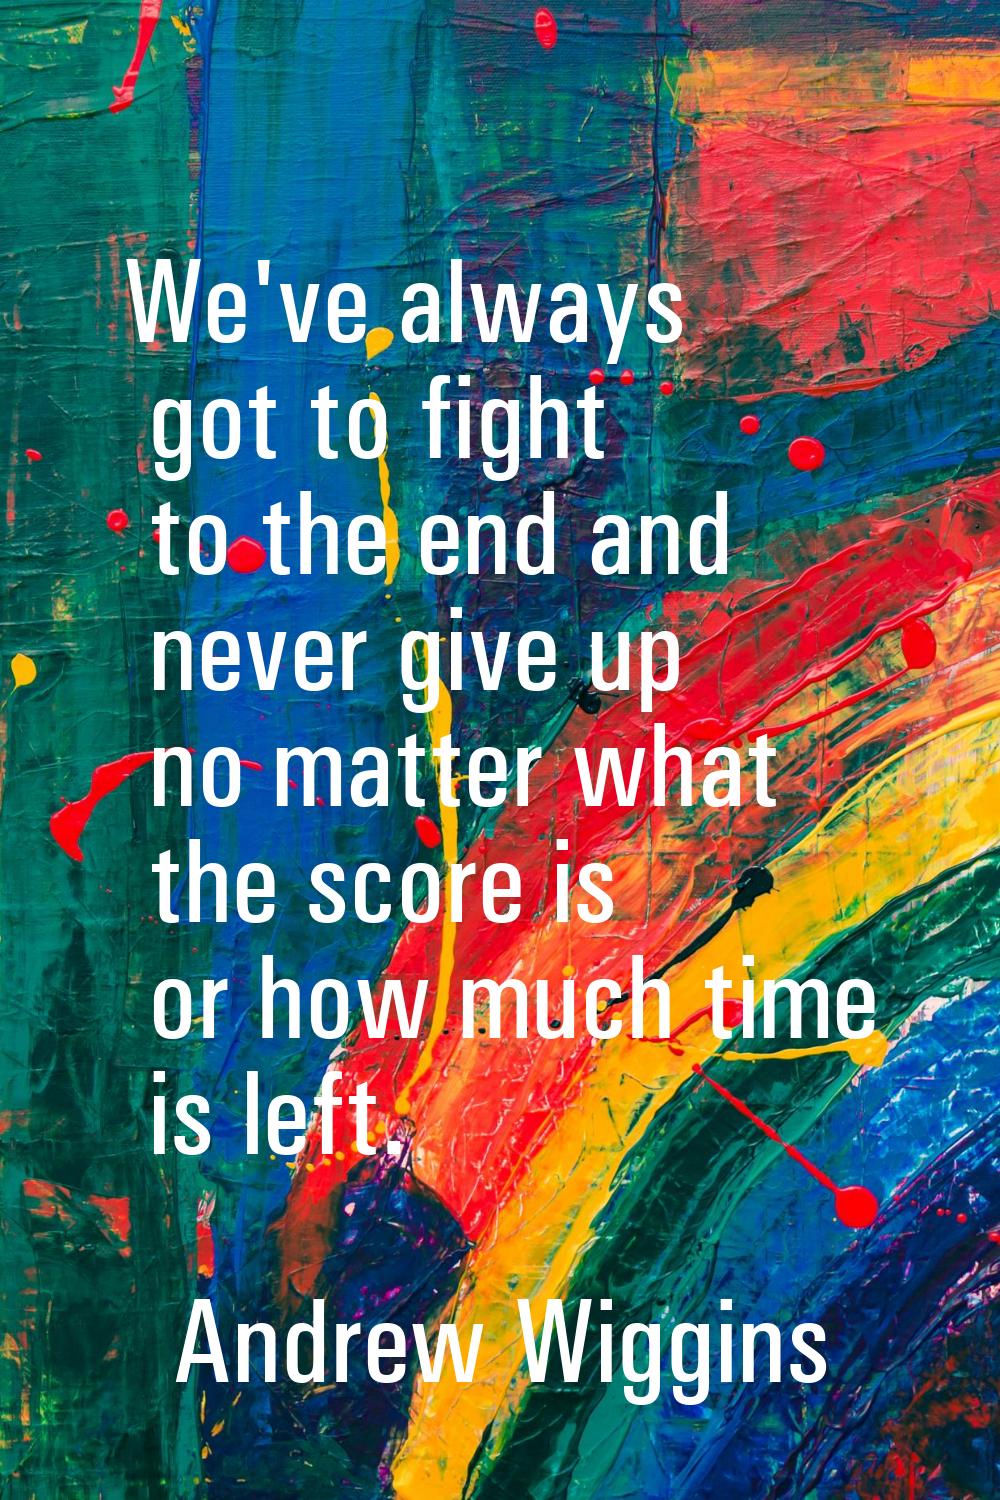 We've always got to fight to the end and never give up no matter what the score is or how much time